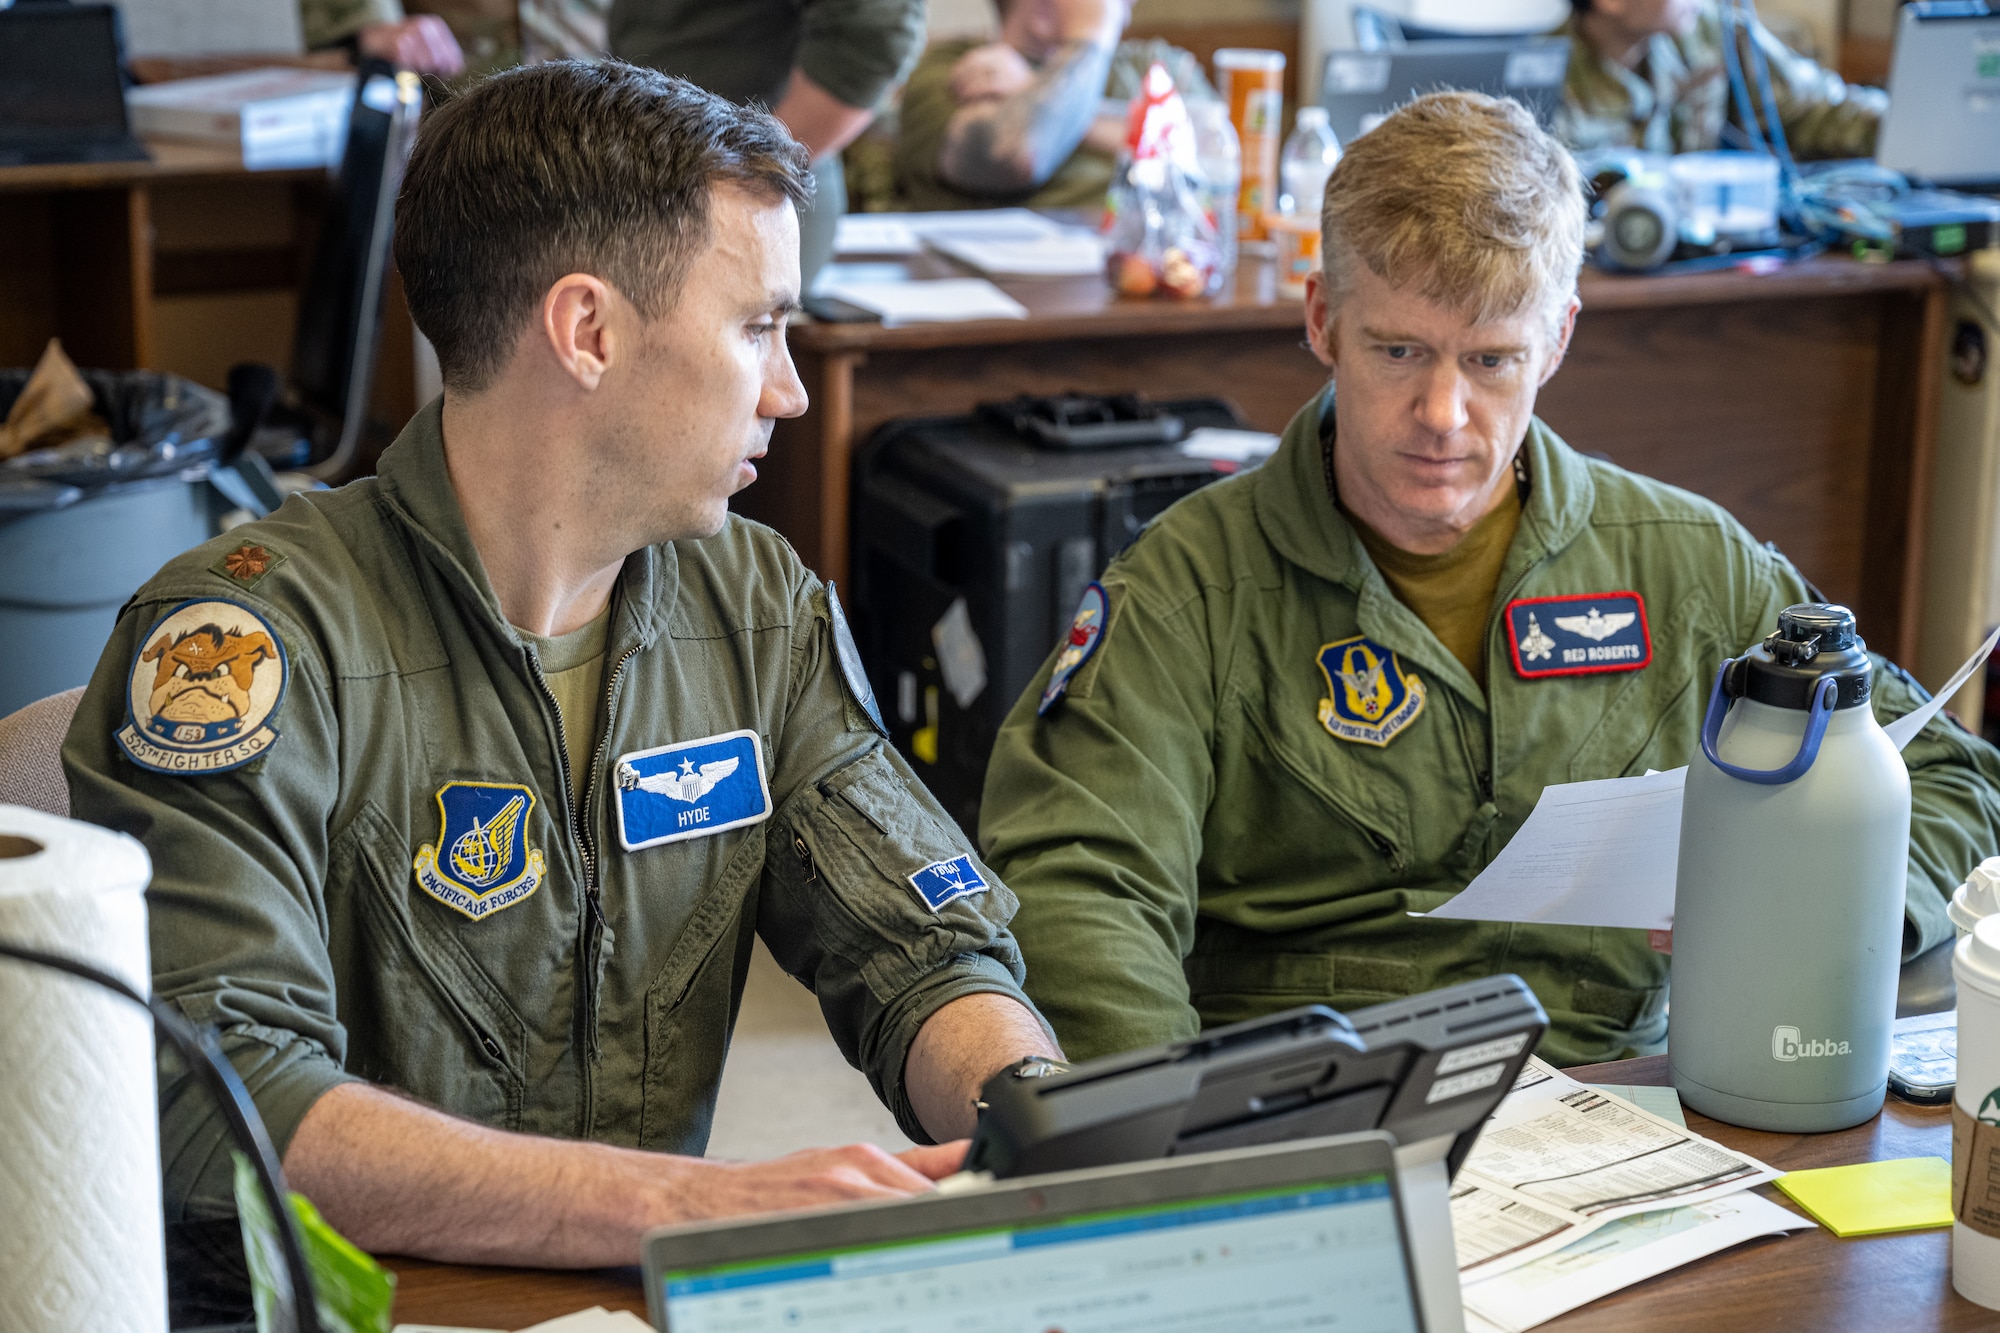 F-22 Raptor pilots assigned to the 525th Expeditionary Fighter Squadron, 3rd Air Expeditionary Wing, out of Joint Base Elmendorf-Richardson, Alaska, mission plan in the tactical operations center during Exercise Bamboo Eagle 24-1 at spoke Naval Air Station North Island, California, Jan. 31, 2024.